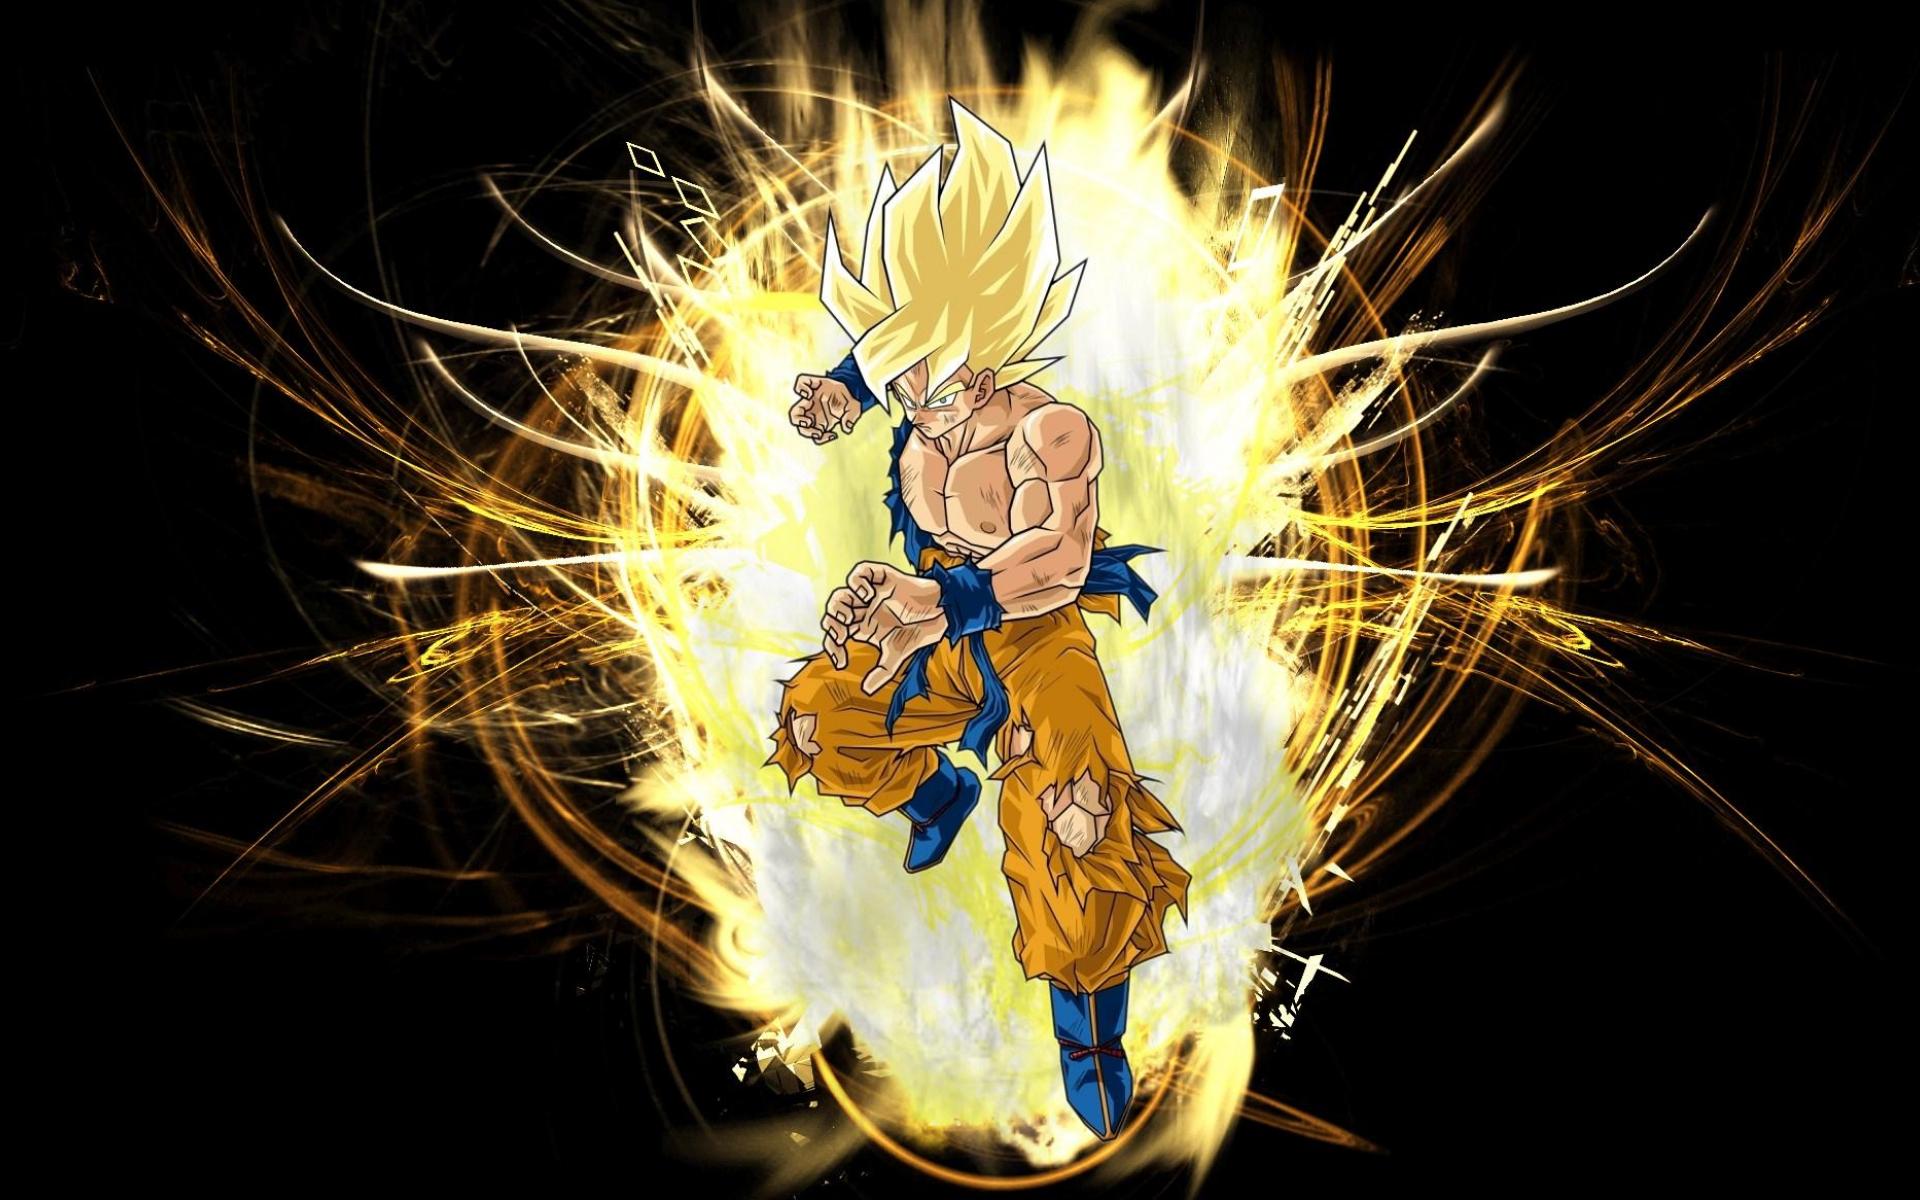 Goku 4K wallpaper for your desktop or mobile screen free and easy to download